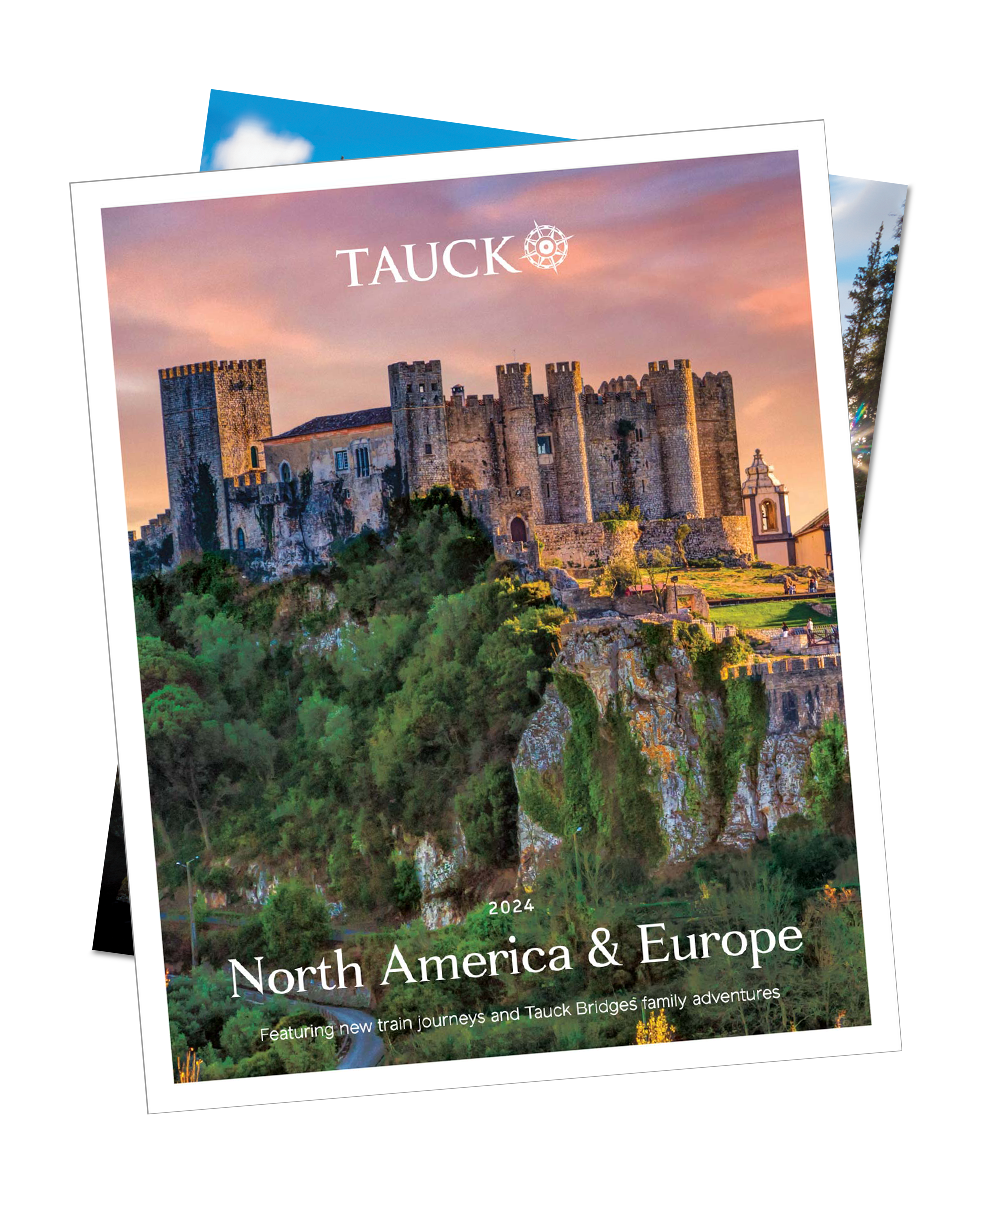 Europe Tours & European Vacation Packages Tauck